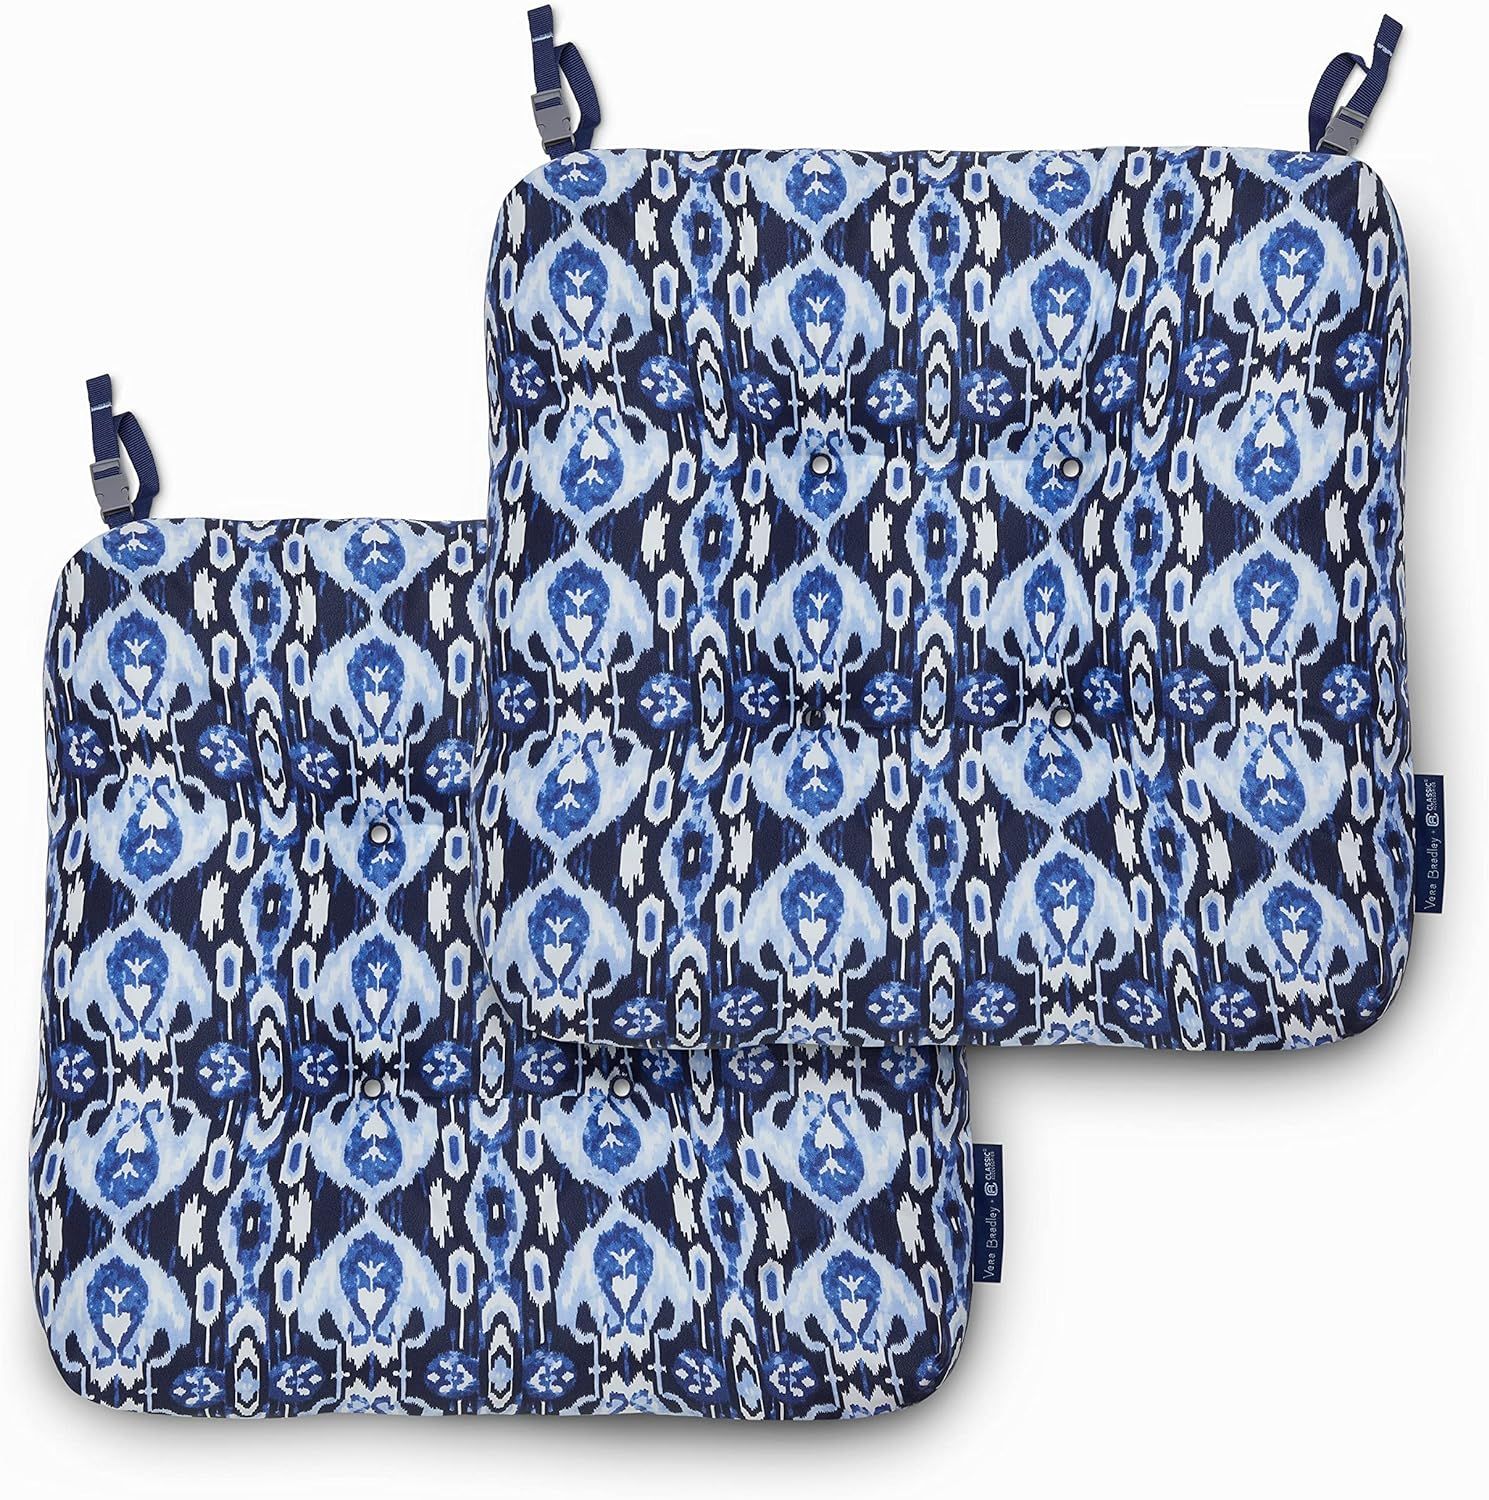 Vera Bradley by Classic Accessories Water-Resistant Patio Chair Cushions, 19 x 19 x 5 Inch, 2 Pac... | Amazon (US)